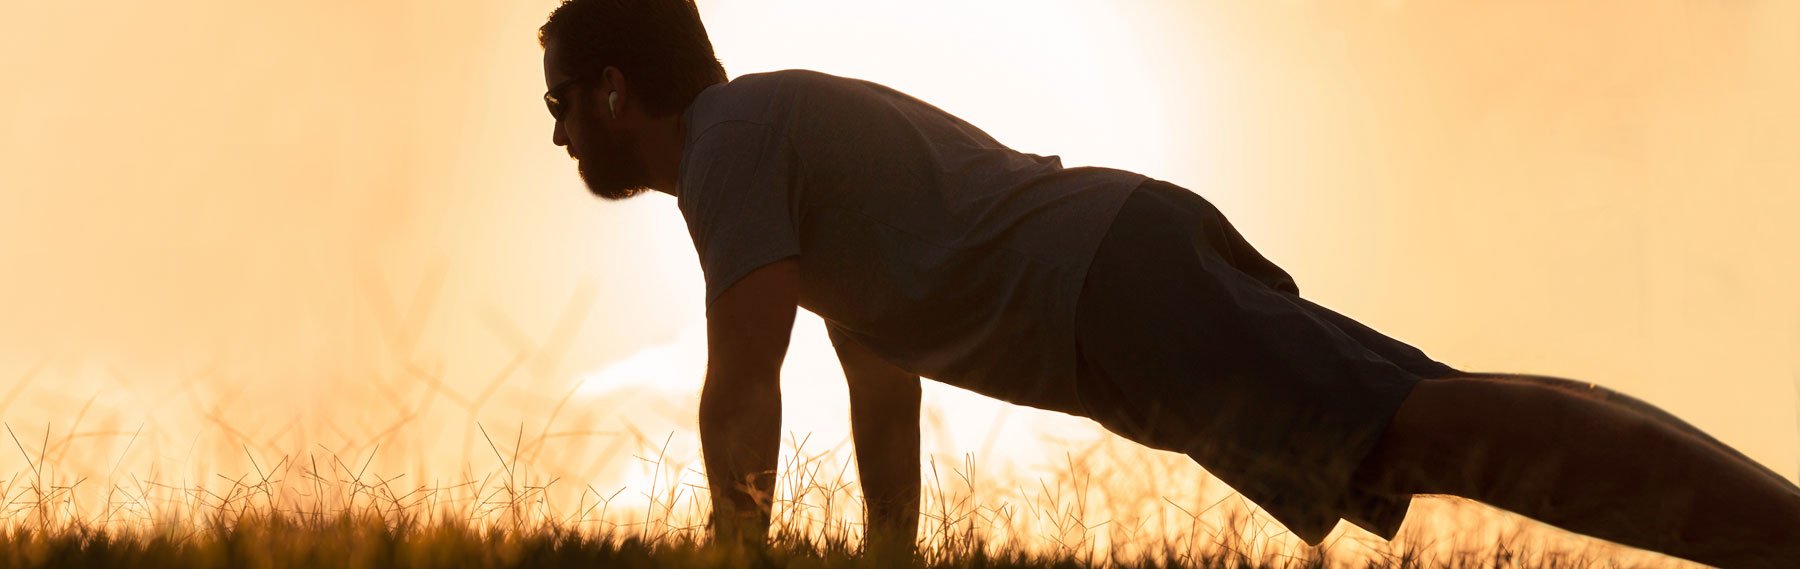 Healthy looking man holding a plank position in front of a sunset